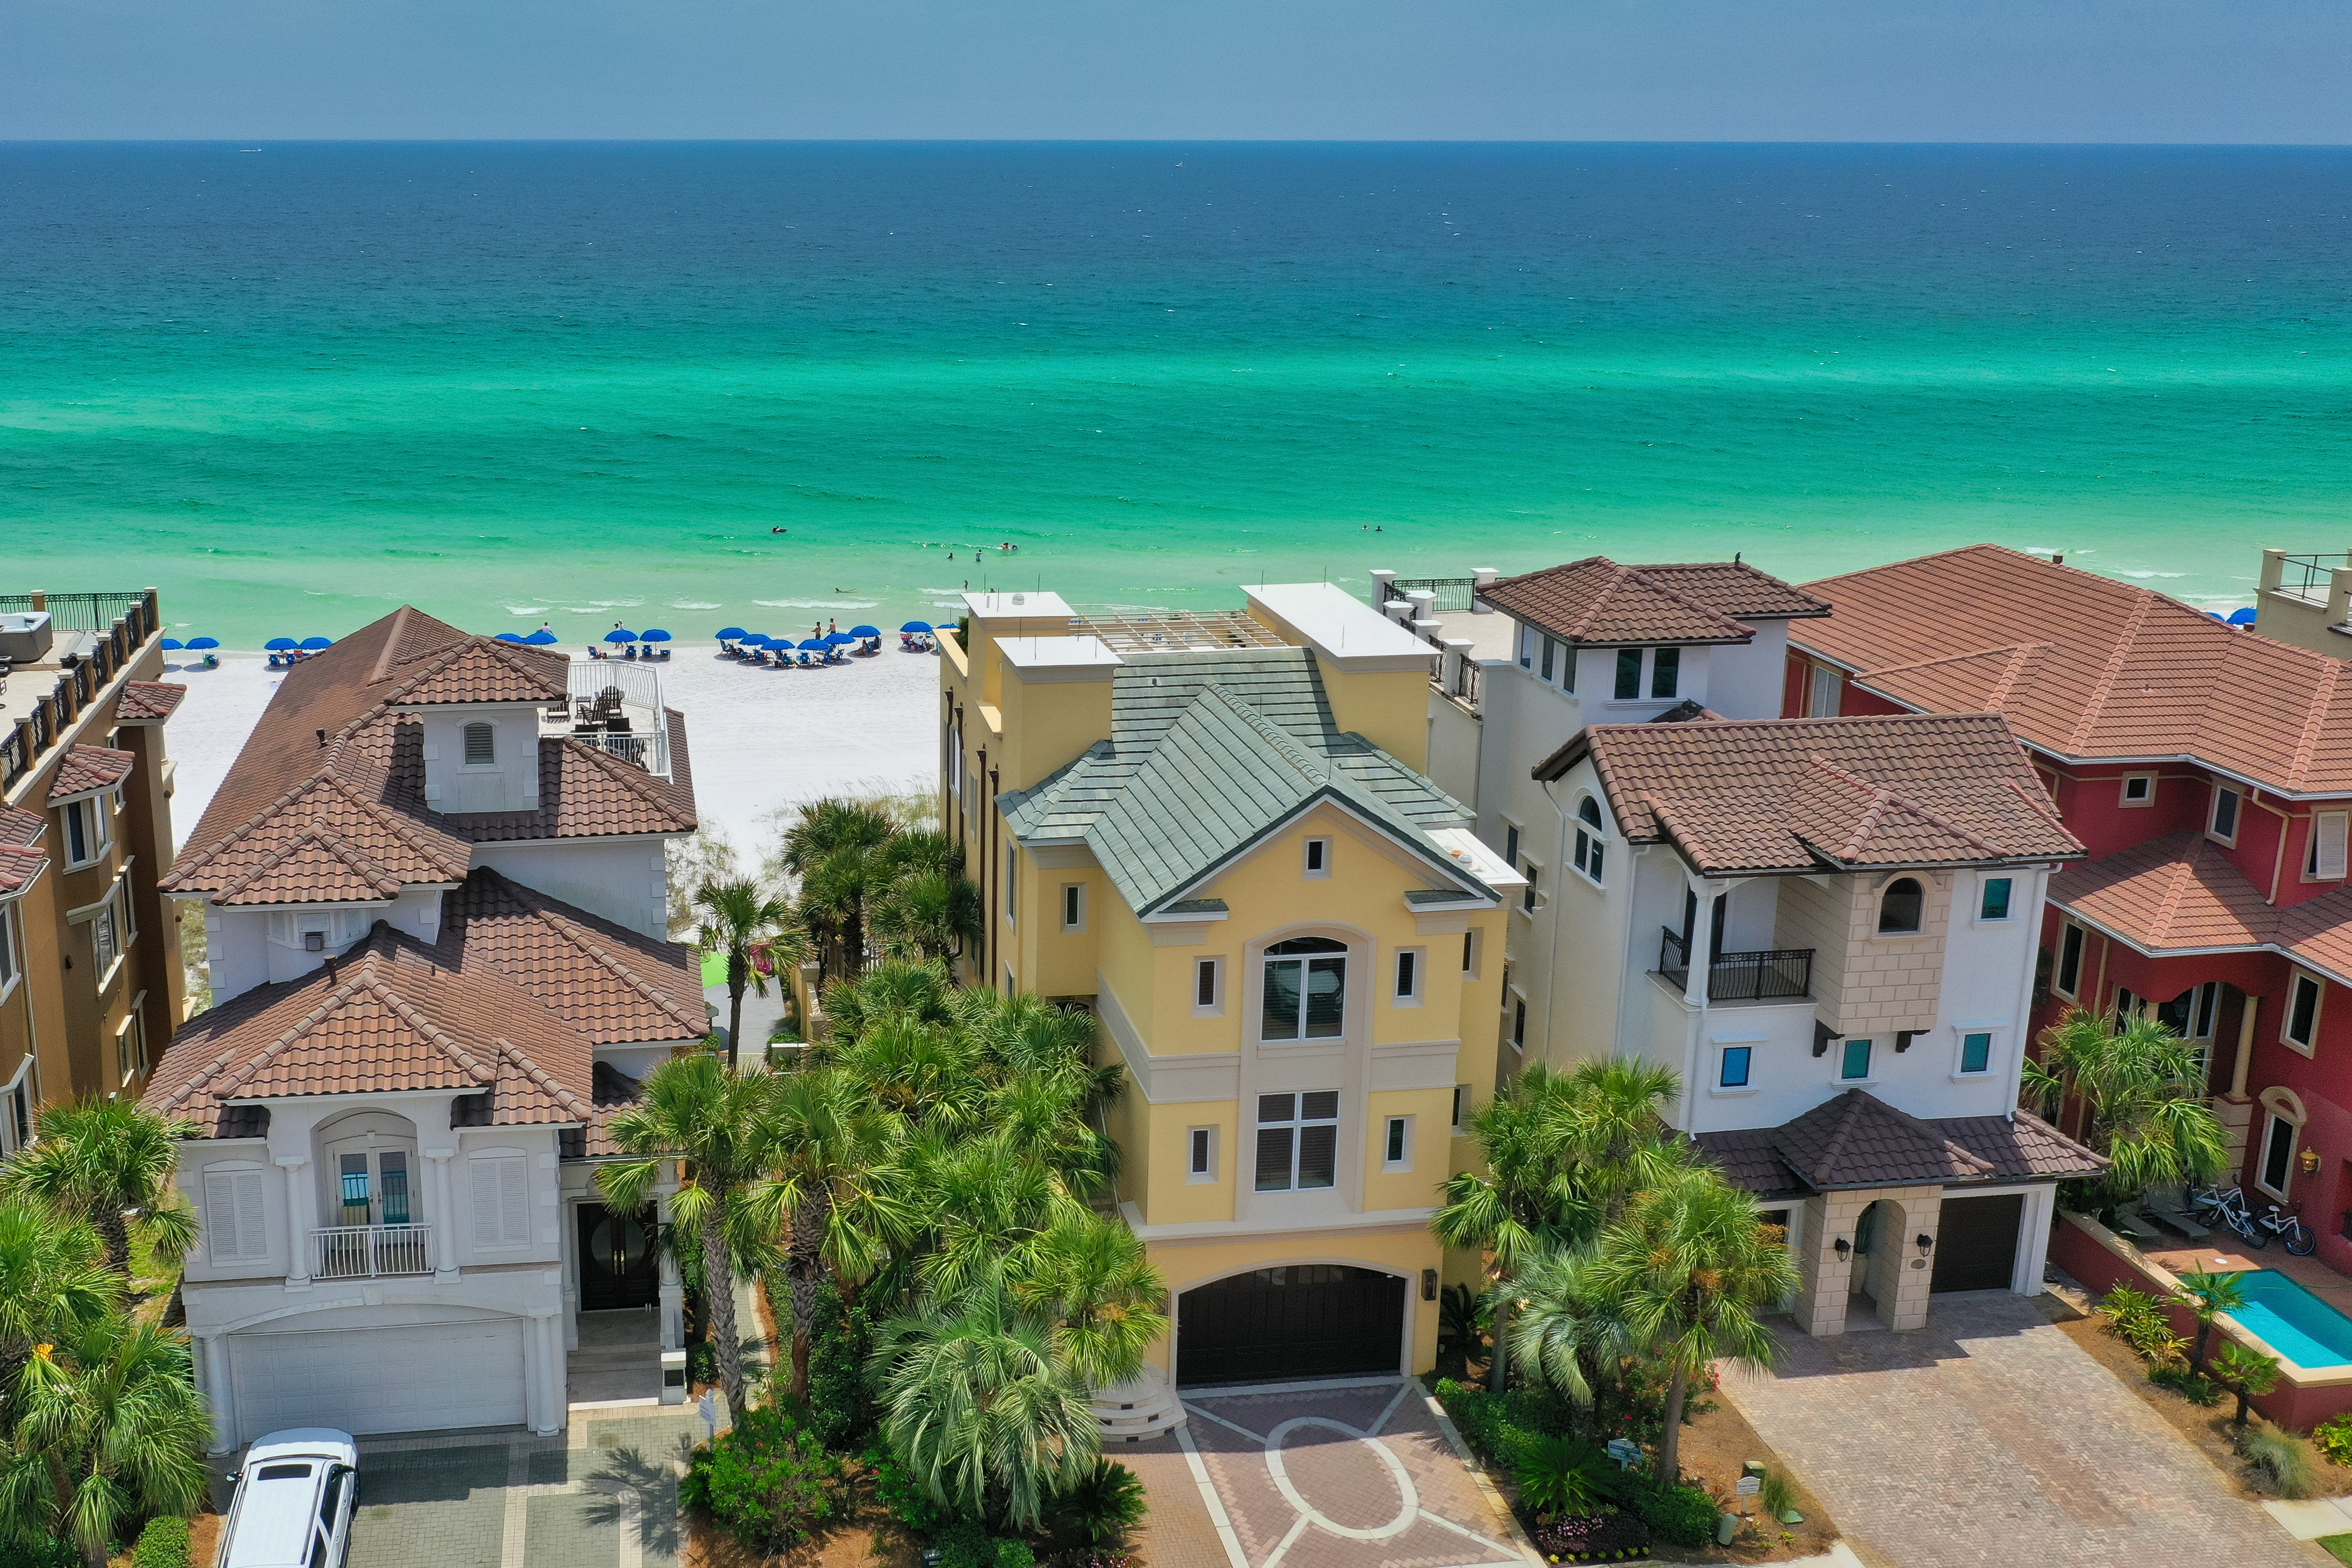 An aerial view of some Destiny By The Sea homes along the beach with emerald Gulf waters